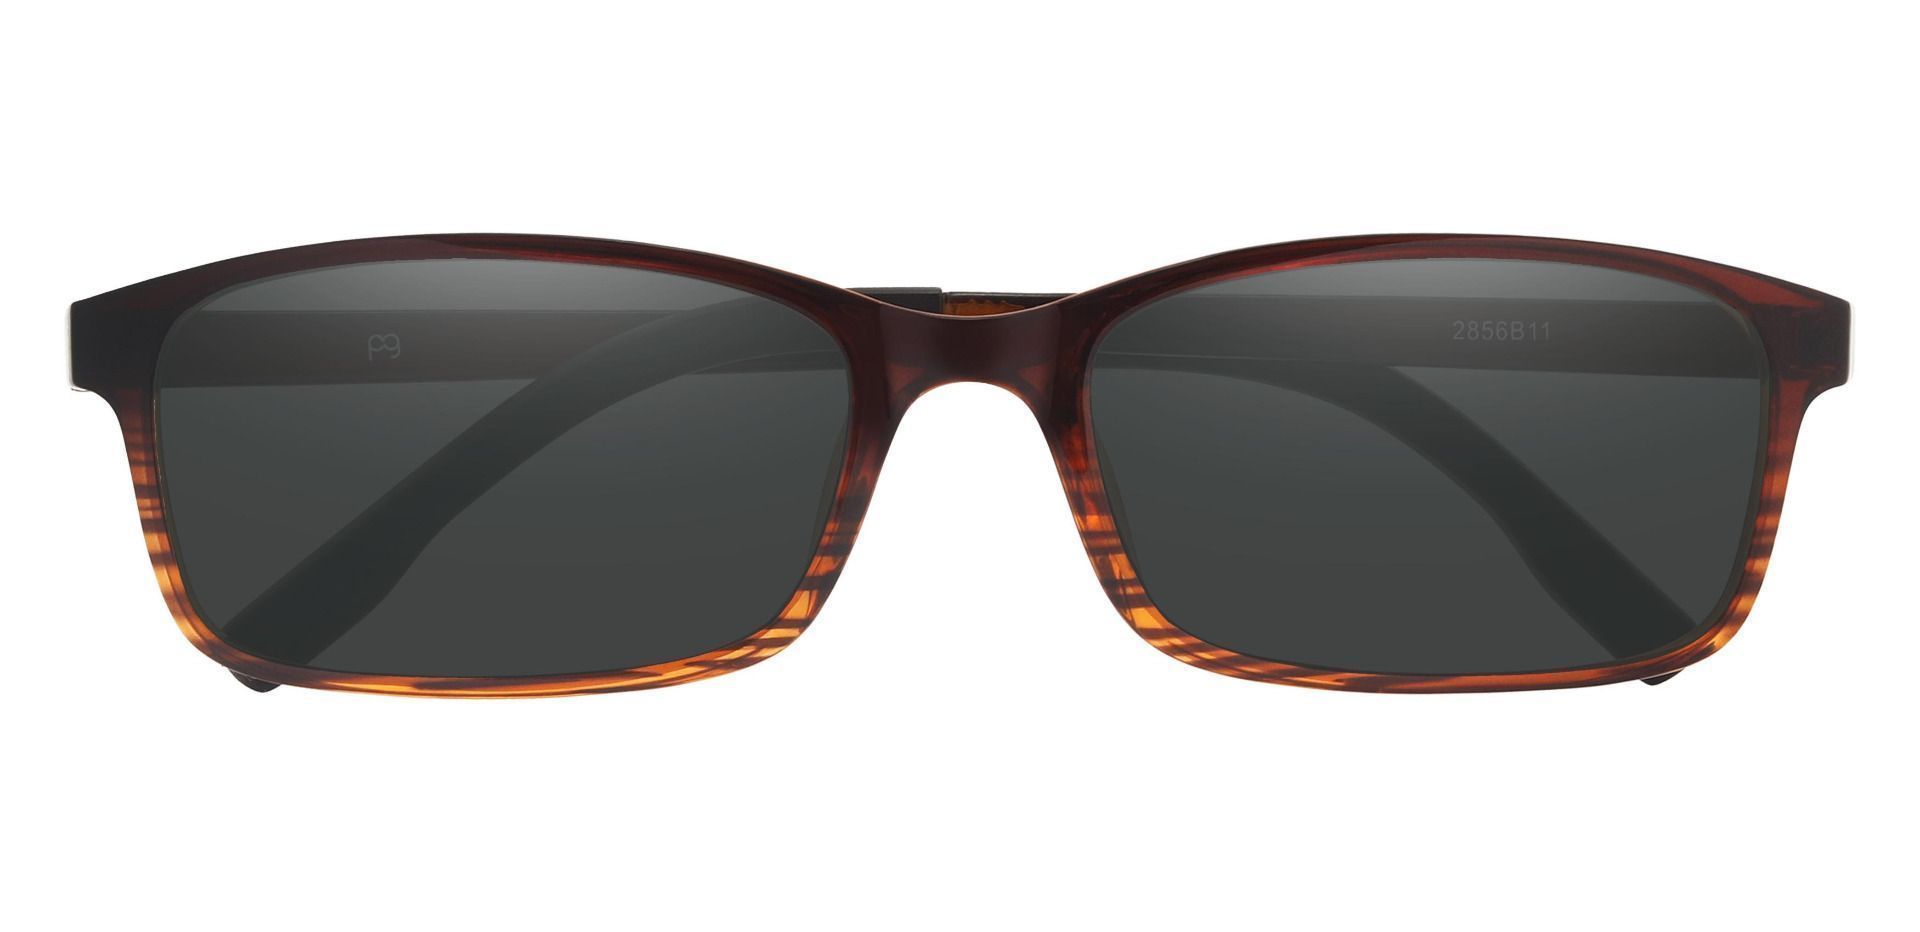 Inman Rectangle Prescription Sunglasses - Brown Frame With Gray Lenses